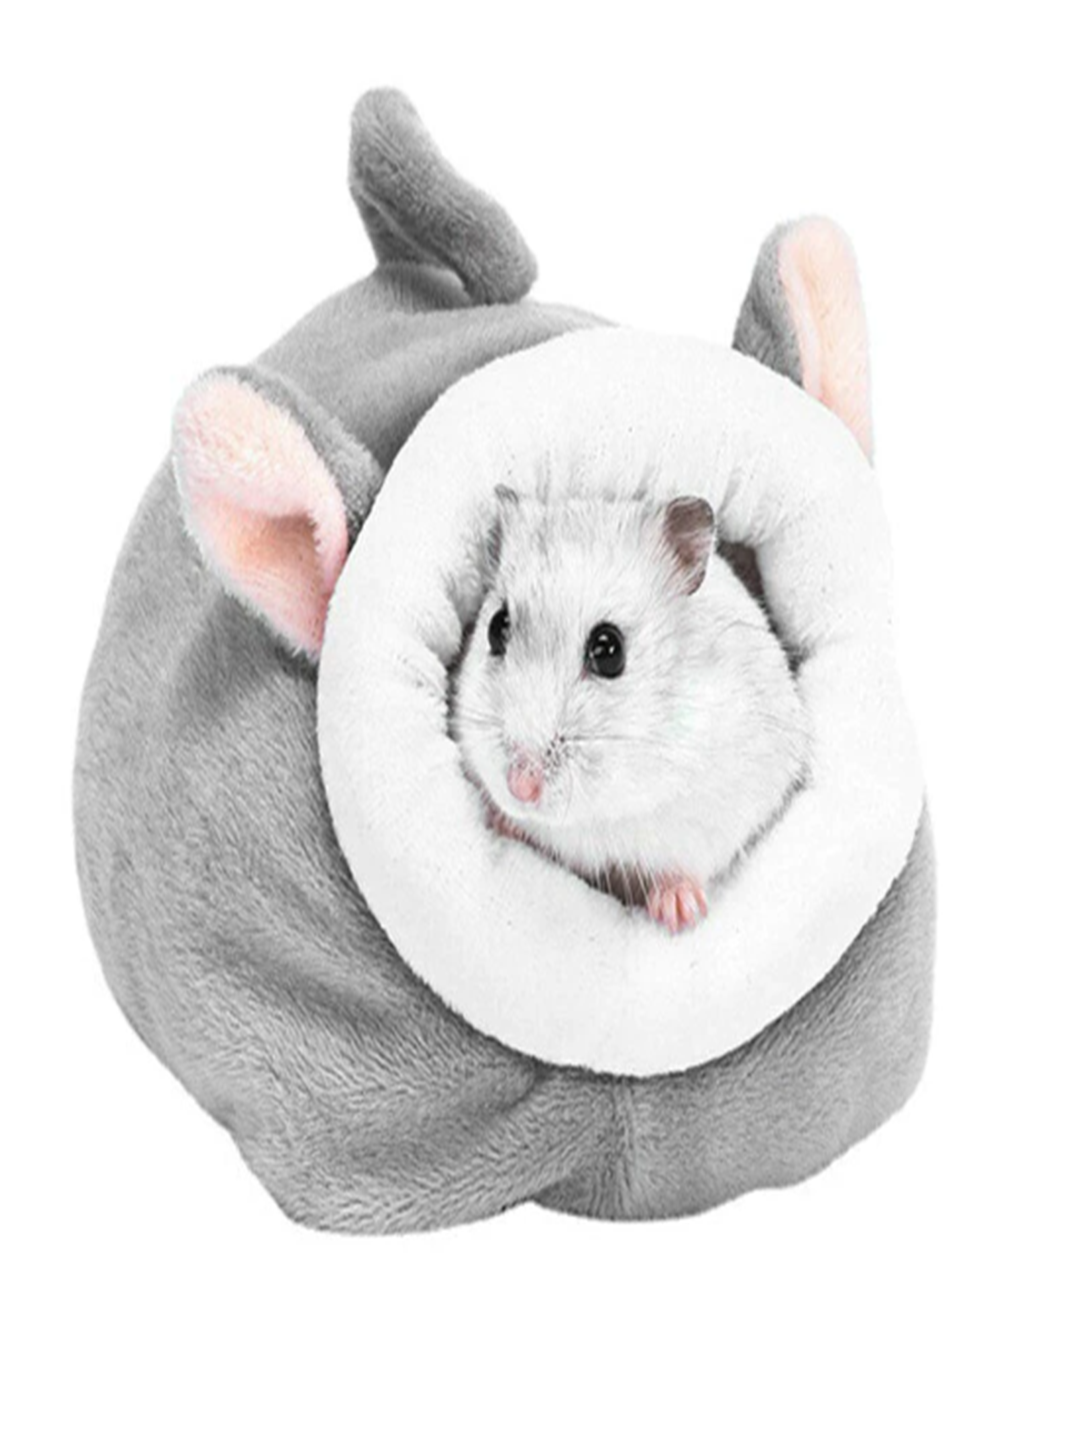 Comfy and warm hamster bed made by plush